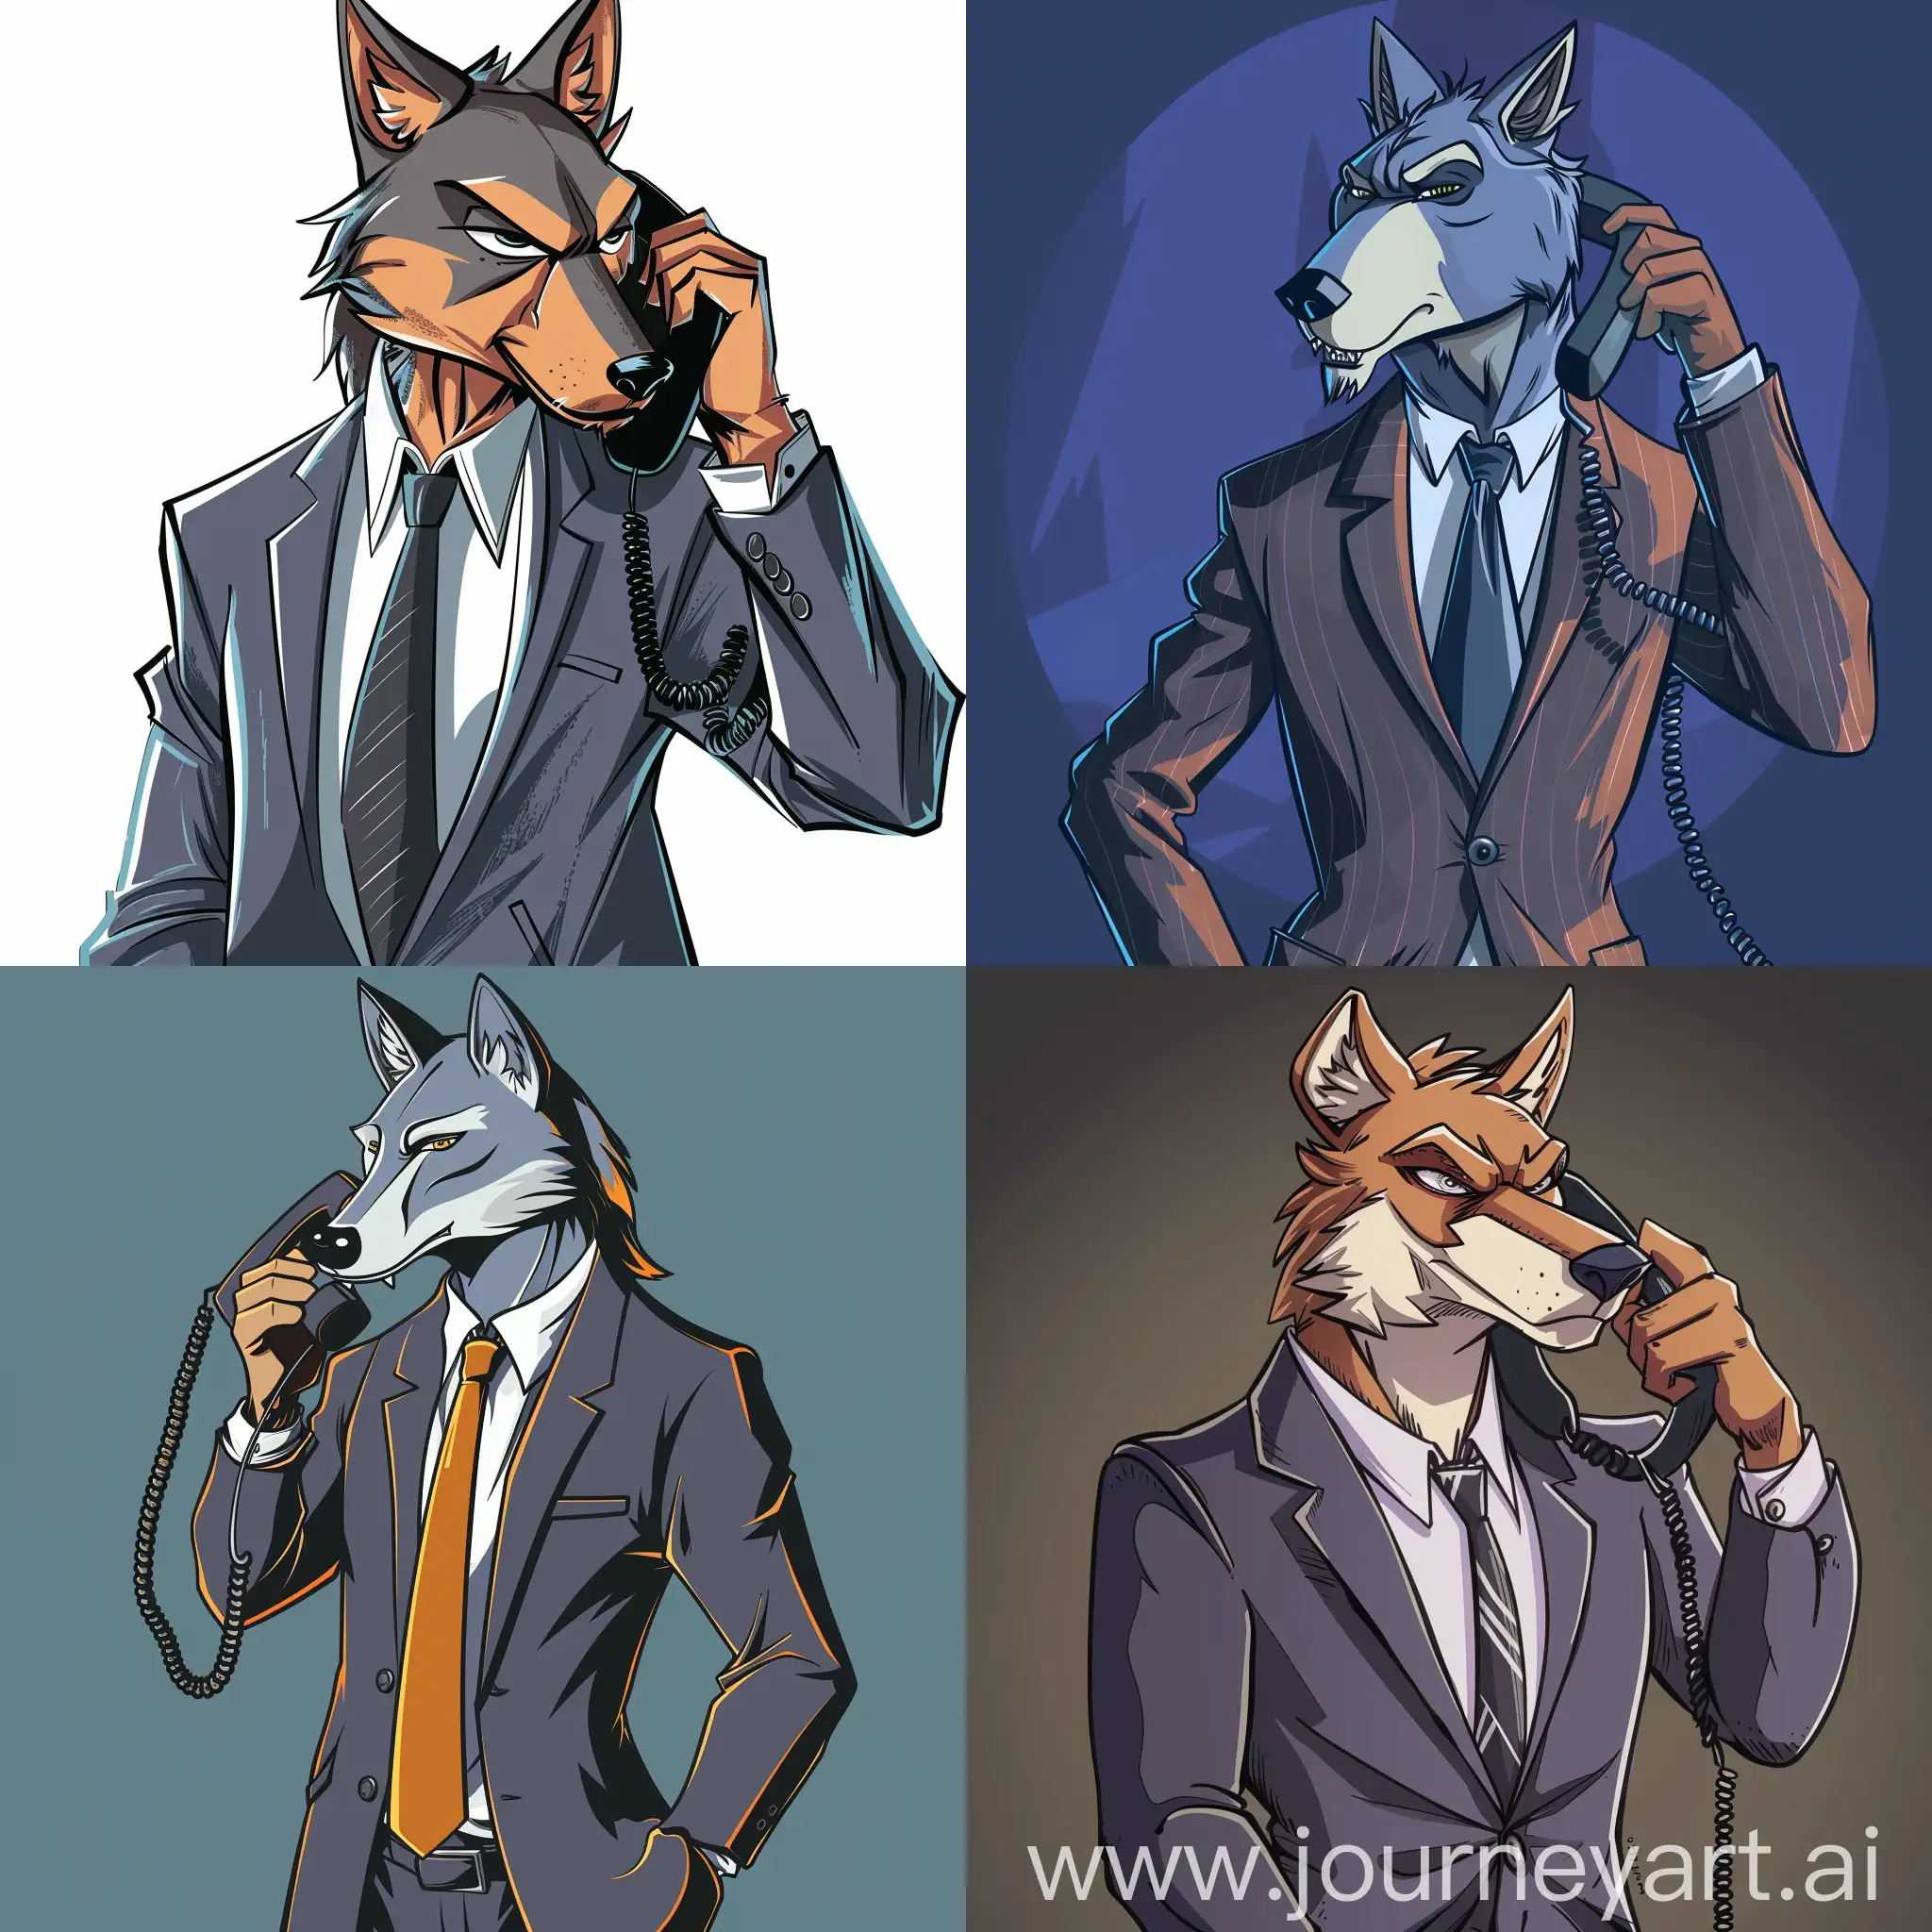 Savvy-Wolf-Broker-in-Expensive-Cartoon-Suit-Makes-Business-Call